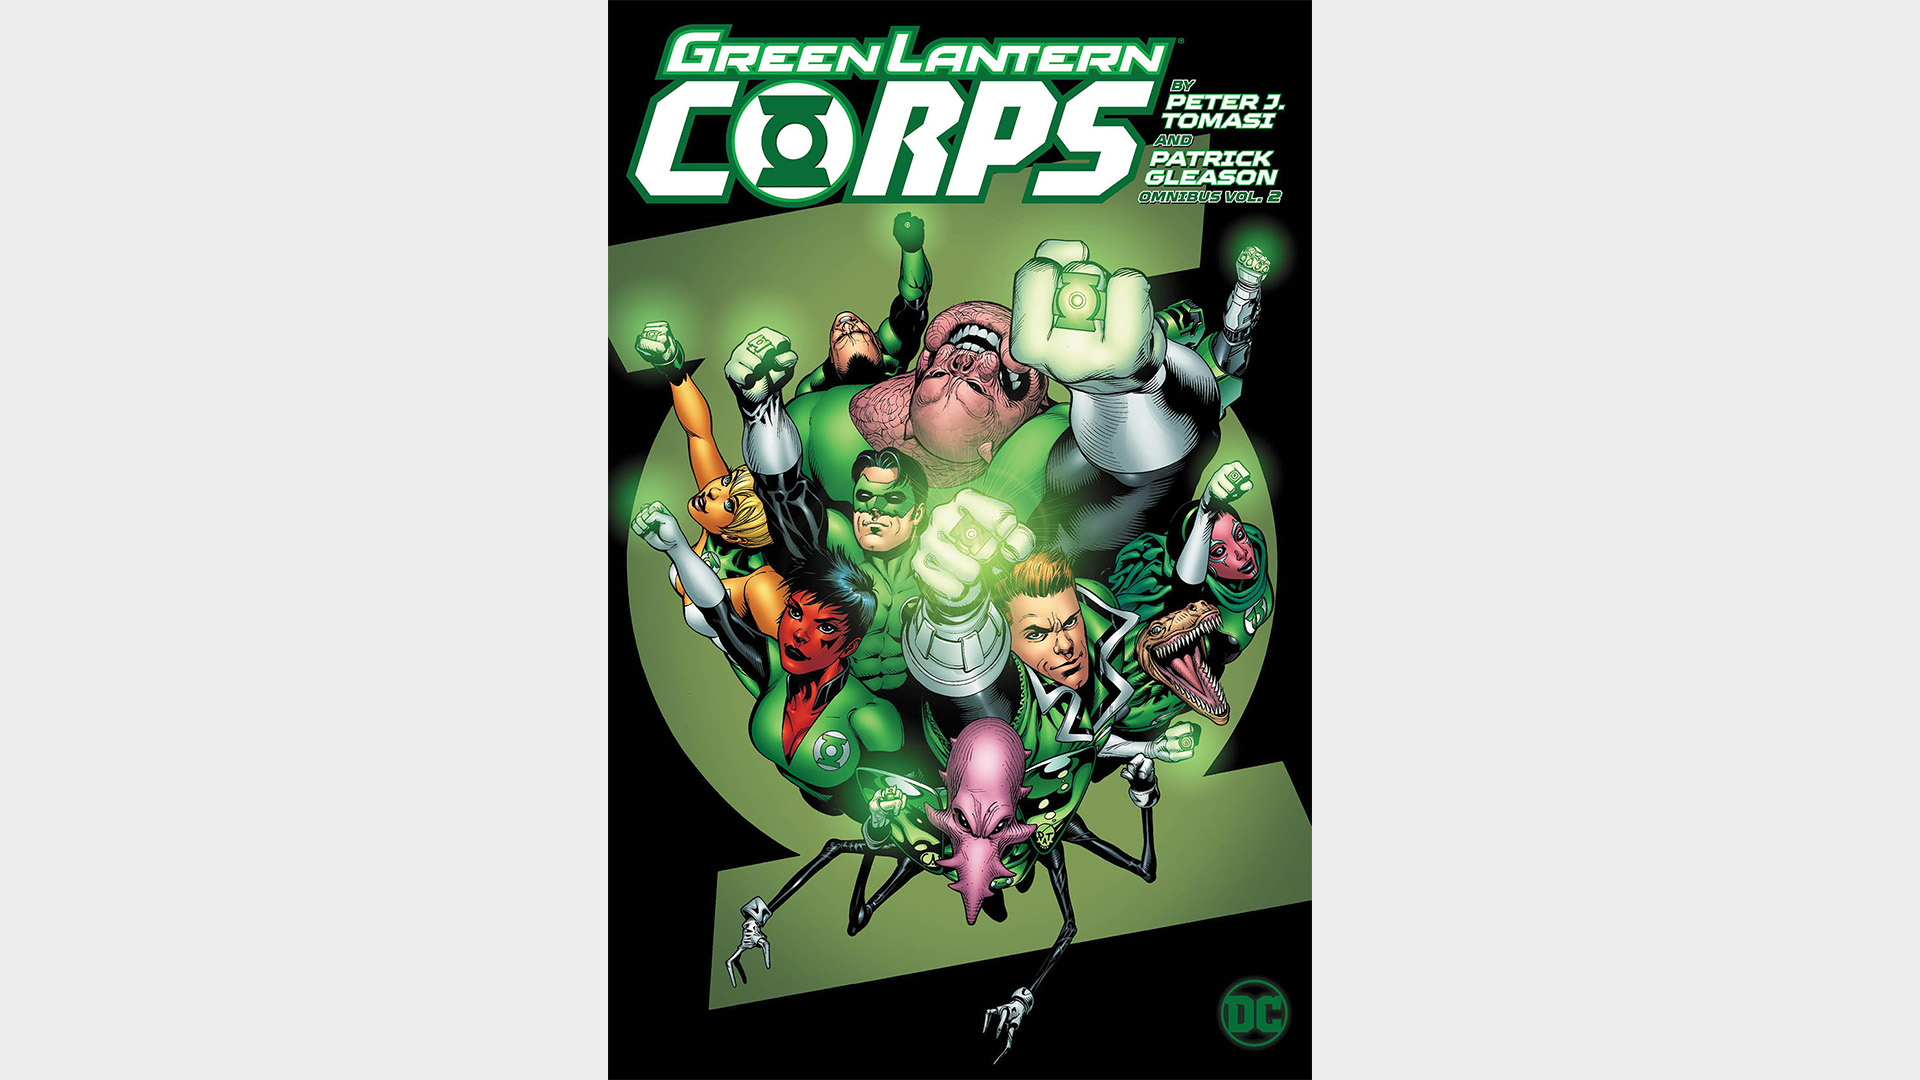 GREEN LANTERN CORPS BY PETER J. TOMASI AND PATRICK GLEASON OMNIBUS VOL. 2